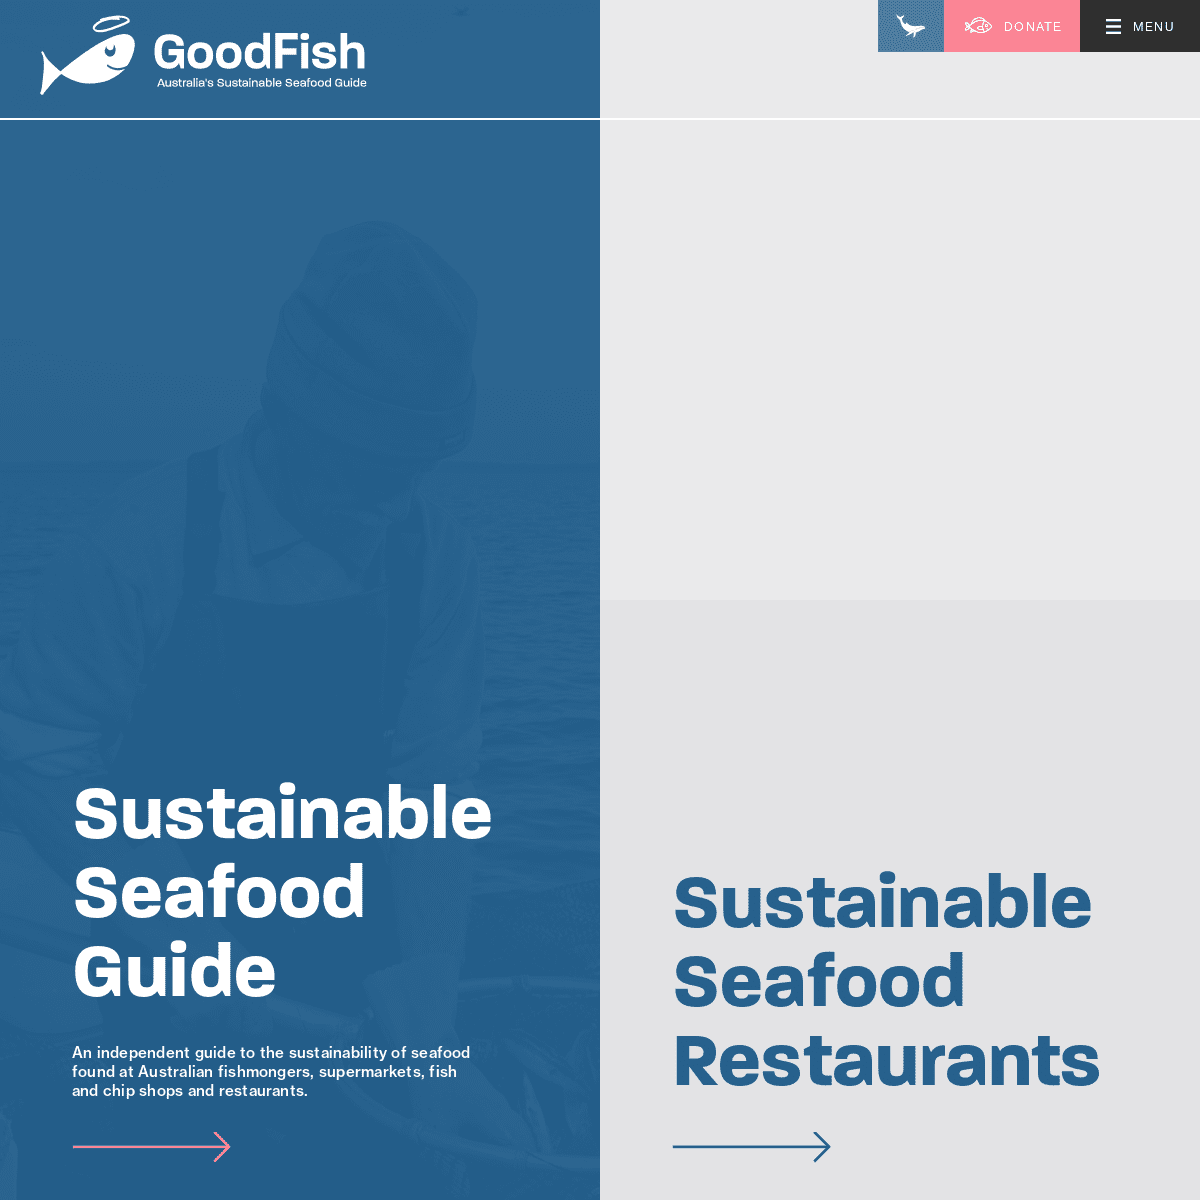 A complete backup of https://goodfish.org.au